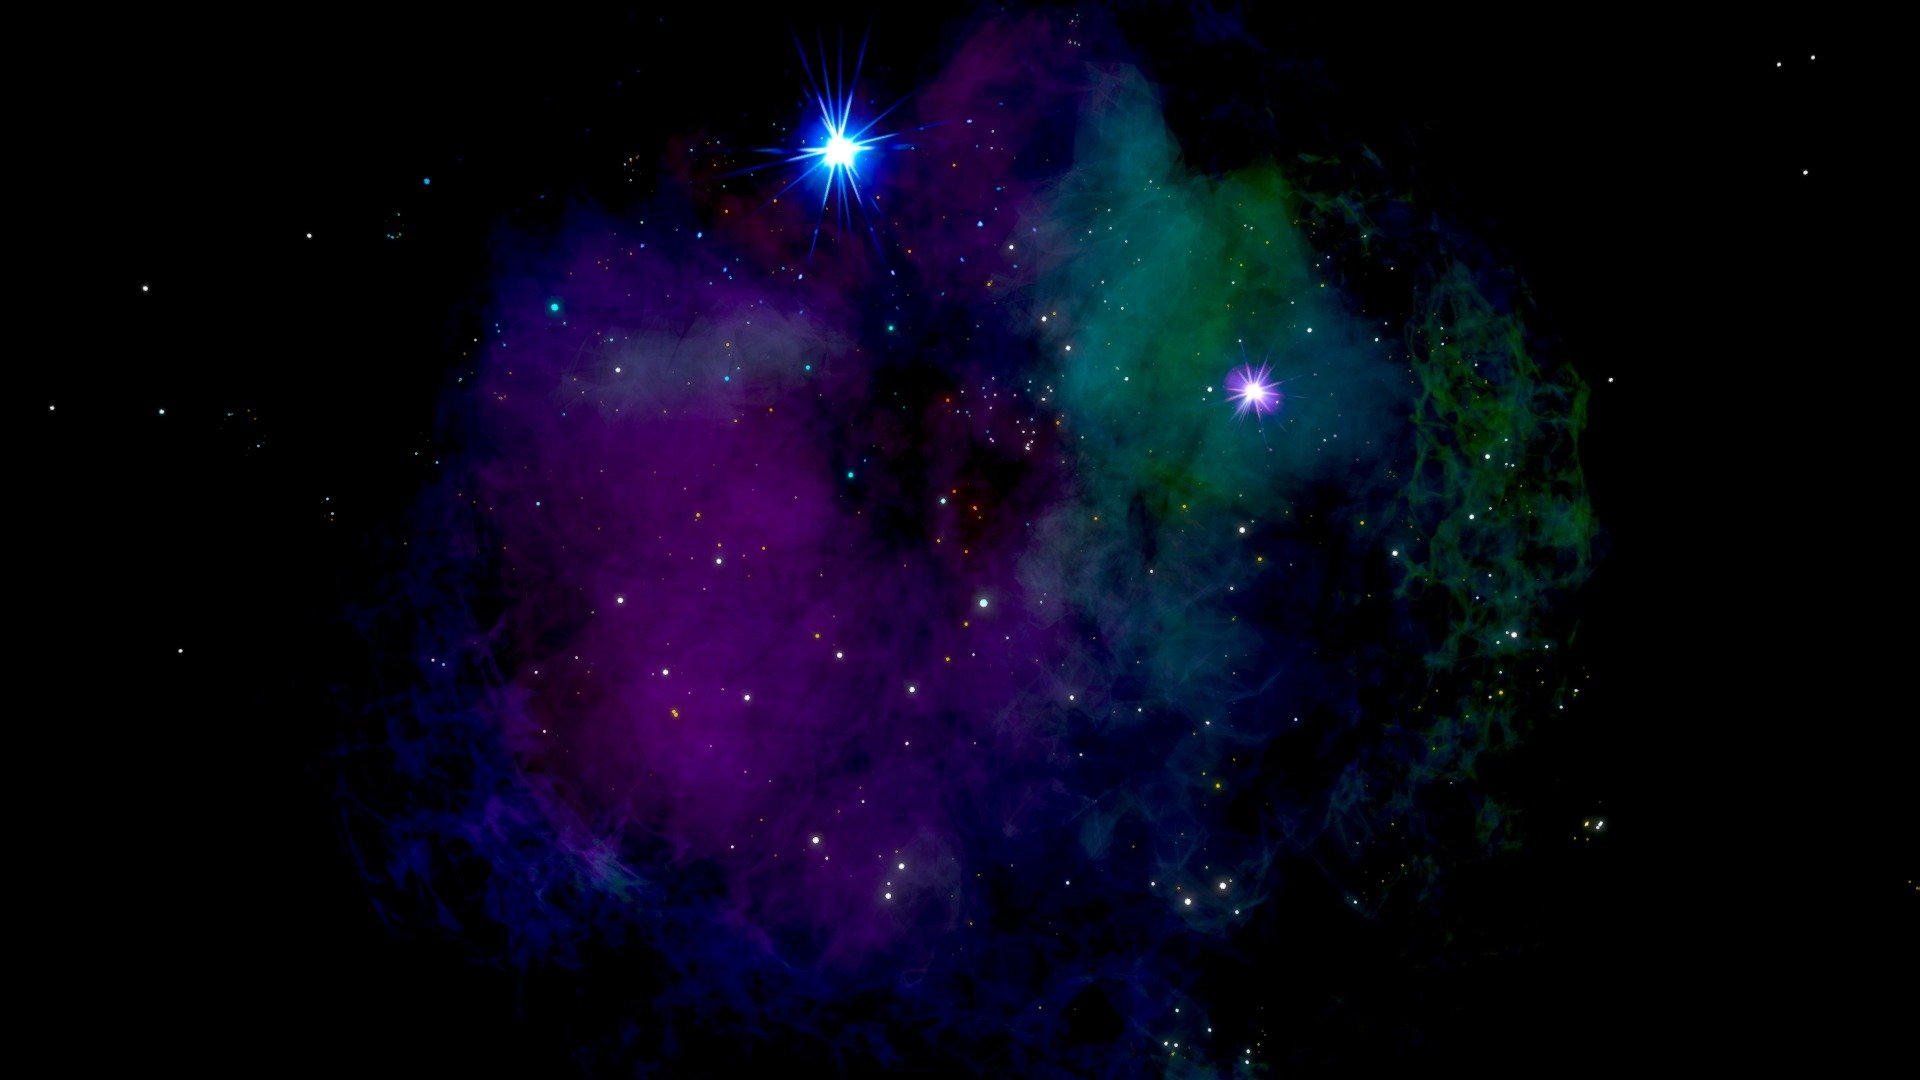 A video of this model can be found here 

The birth of a star is a complex process which takes place in molecular clouds of the interstellar medium. The  clouds (or diffuse nebulae) consist in a mixture of dust, hydrogen, helium and other ionized gases. The interstellar material is enriched by heavy elements previously forged in the interior of stars and ejected at the end of their lives in the form of dense winds and supernova explosions. Dense regions within the clouds collapse and form new stars. For this reason, these spectacular nebulae are often referred as stellar nurseries or star-forming regions.  The model is an artist's view of one of these stellar nurseries 3d model